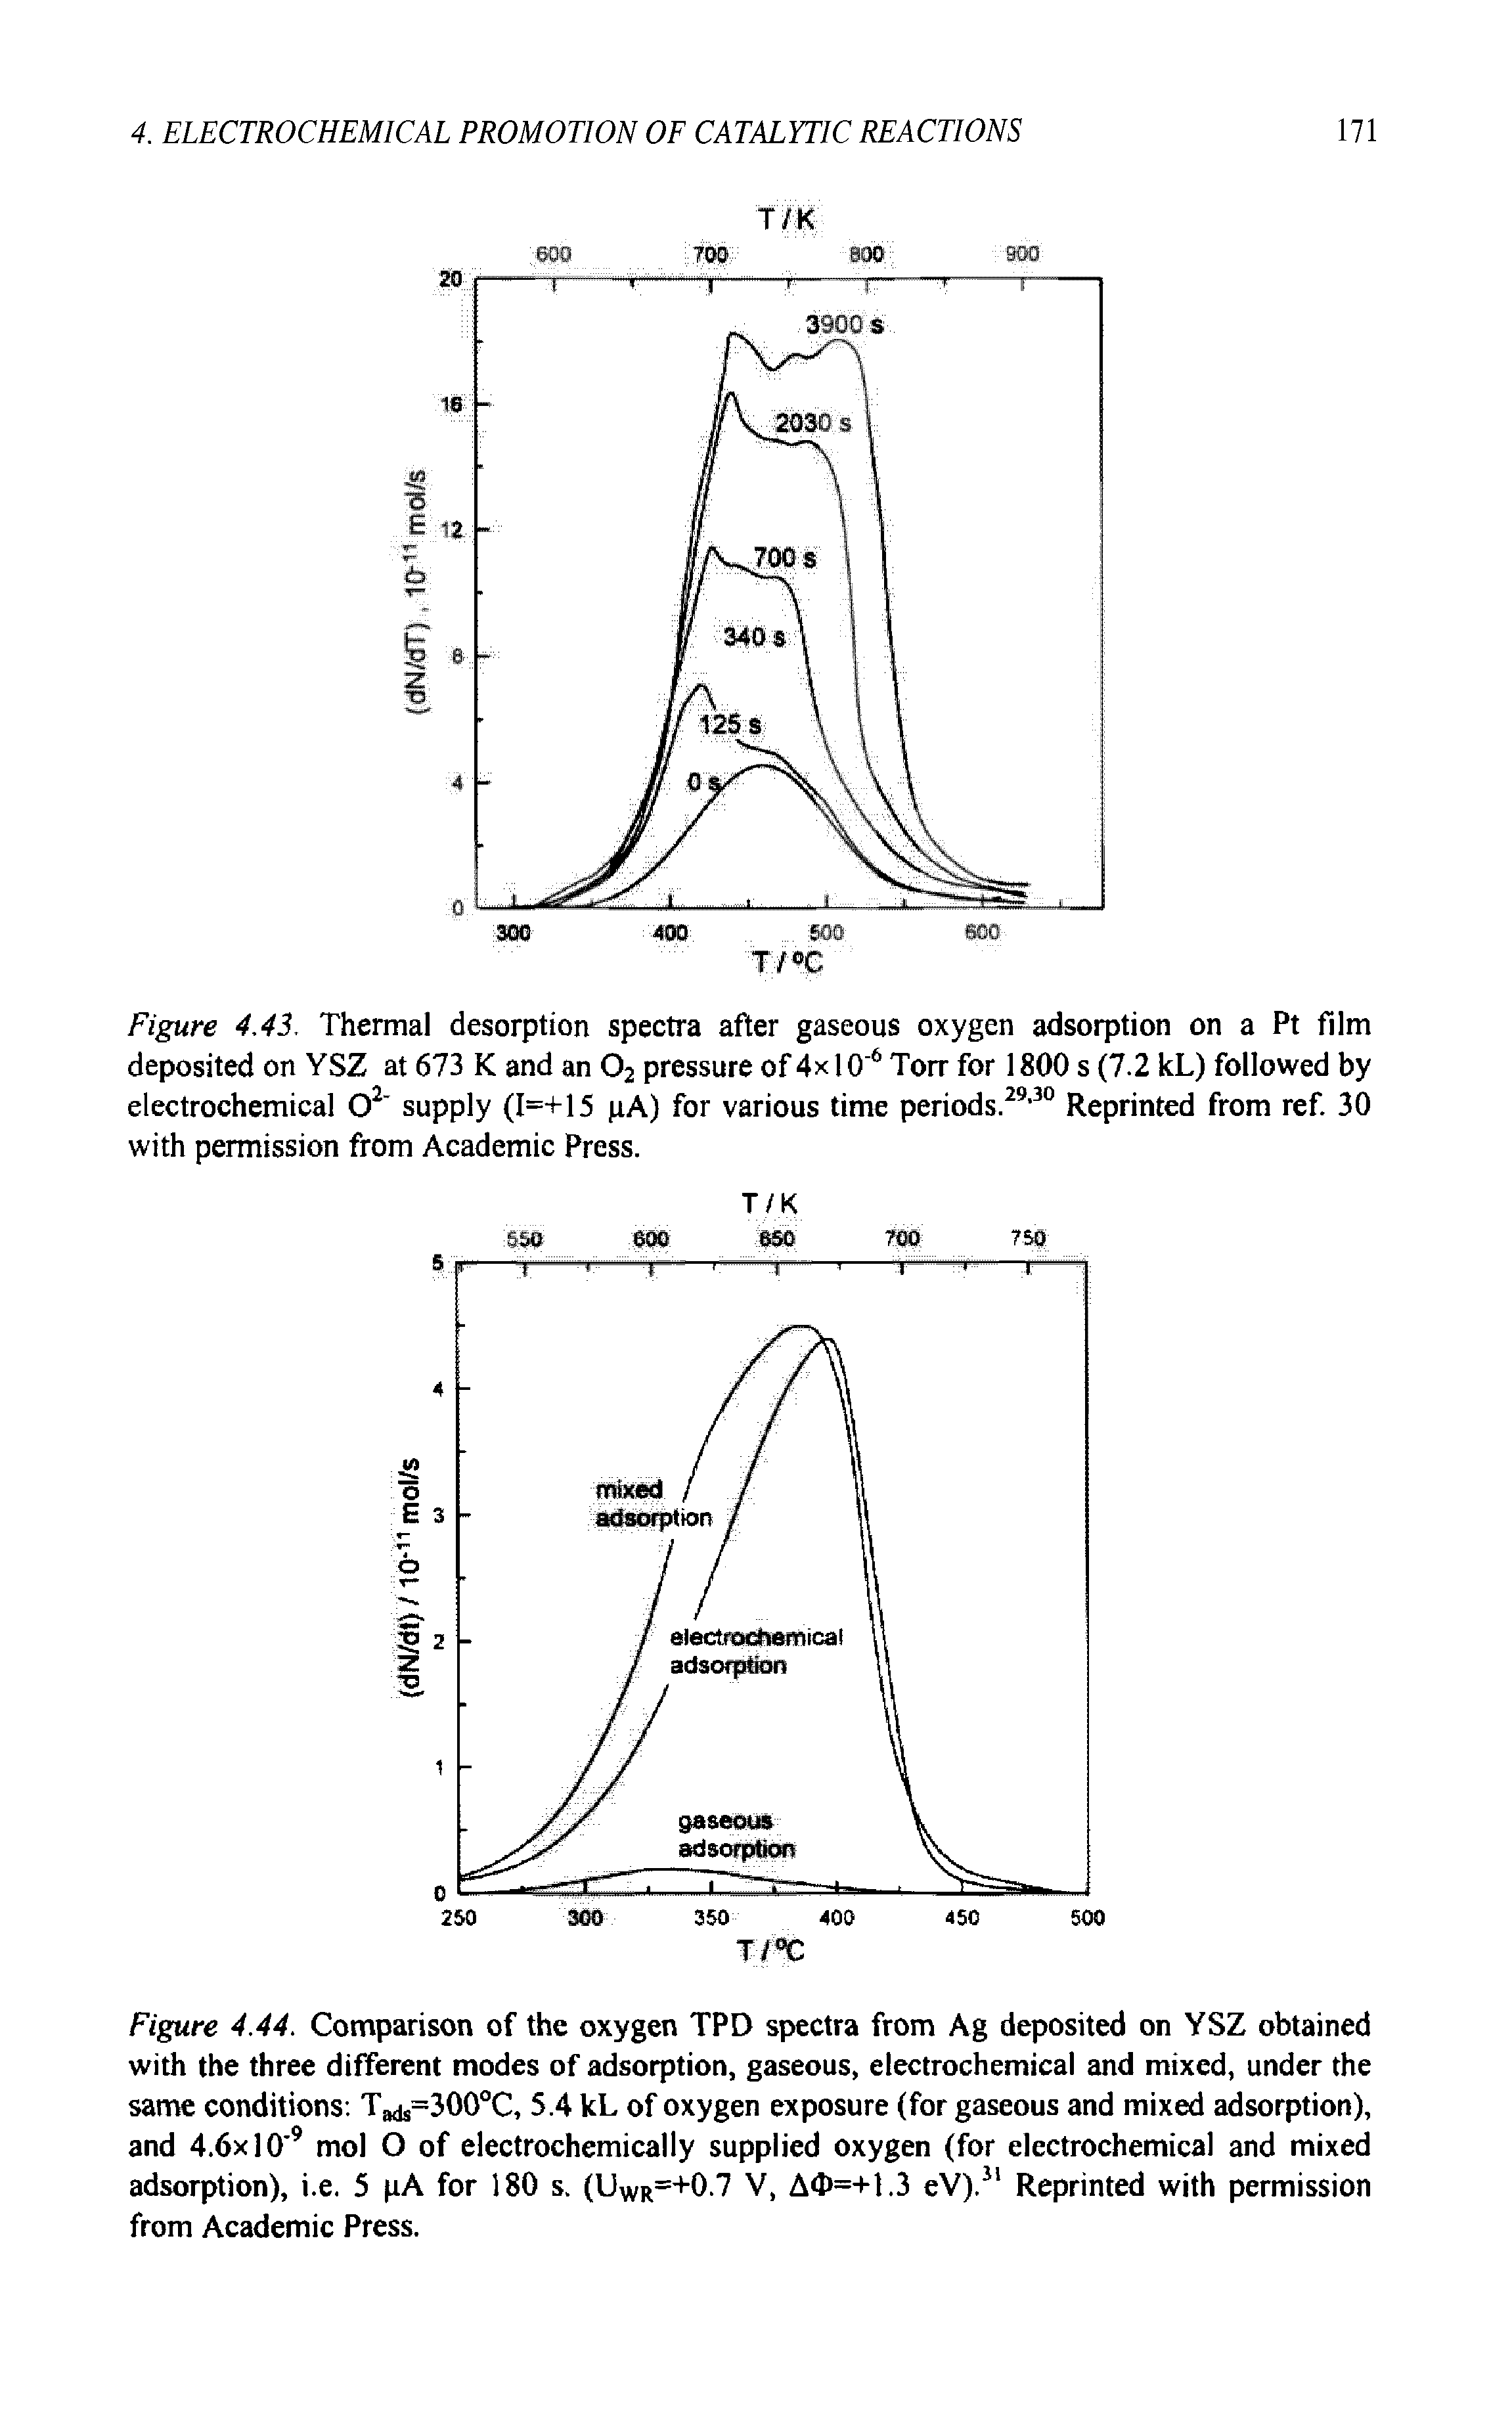 Figure 4.44. Comparison of the oxygen TPD spectra from Ag deposited on YSZ obtained with the three different modes of adsorption, gaseous, electrochemical and mixed, under the same conditions. TadS=300°C, 5.4 kL of oxygen exposure (for gaseous and mixed adsorption), and 4.6x1 O 9 mol O of electrochemically supplied oxygen (for electrochemical and mixed adsorption), i.e. 5 pA for 180 s. (UWR=+0.7 V, A<J>=+1.3 eV).31 Reprinted with permission from Academic Press.